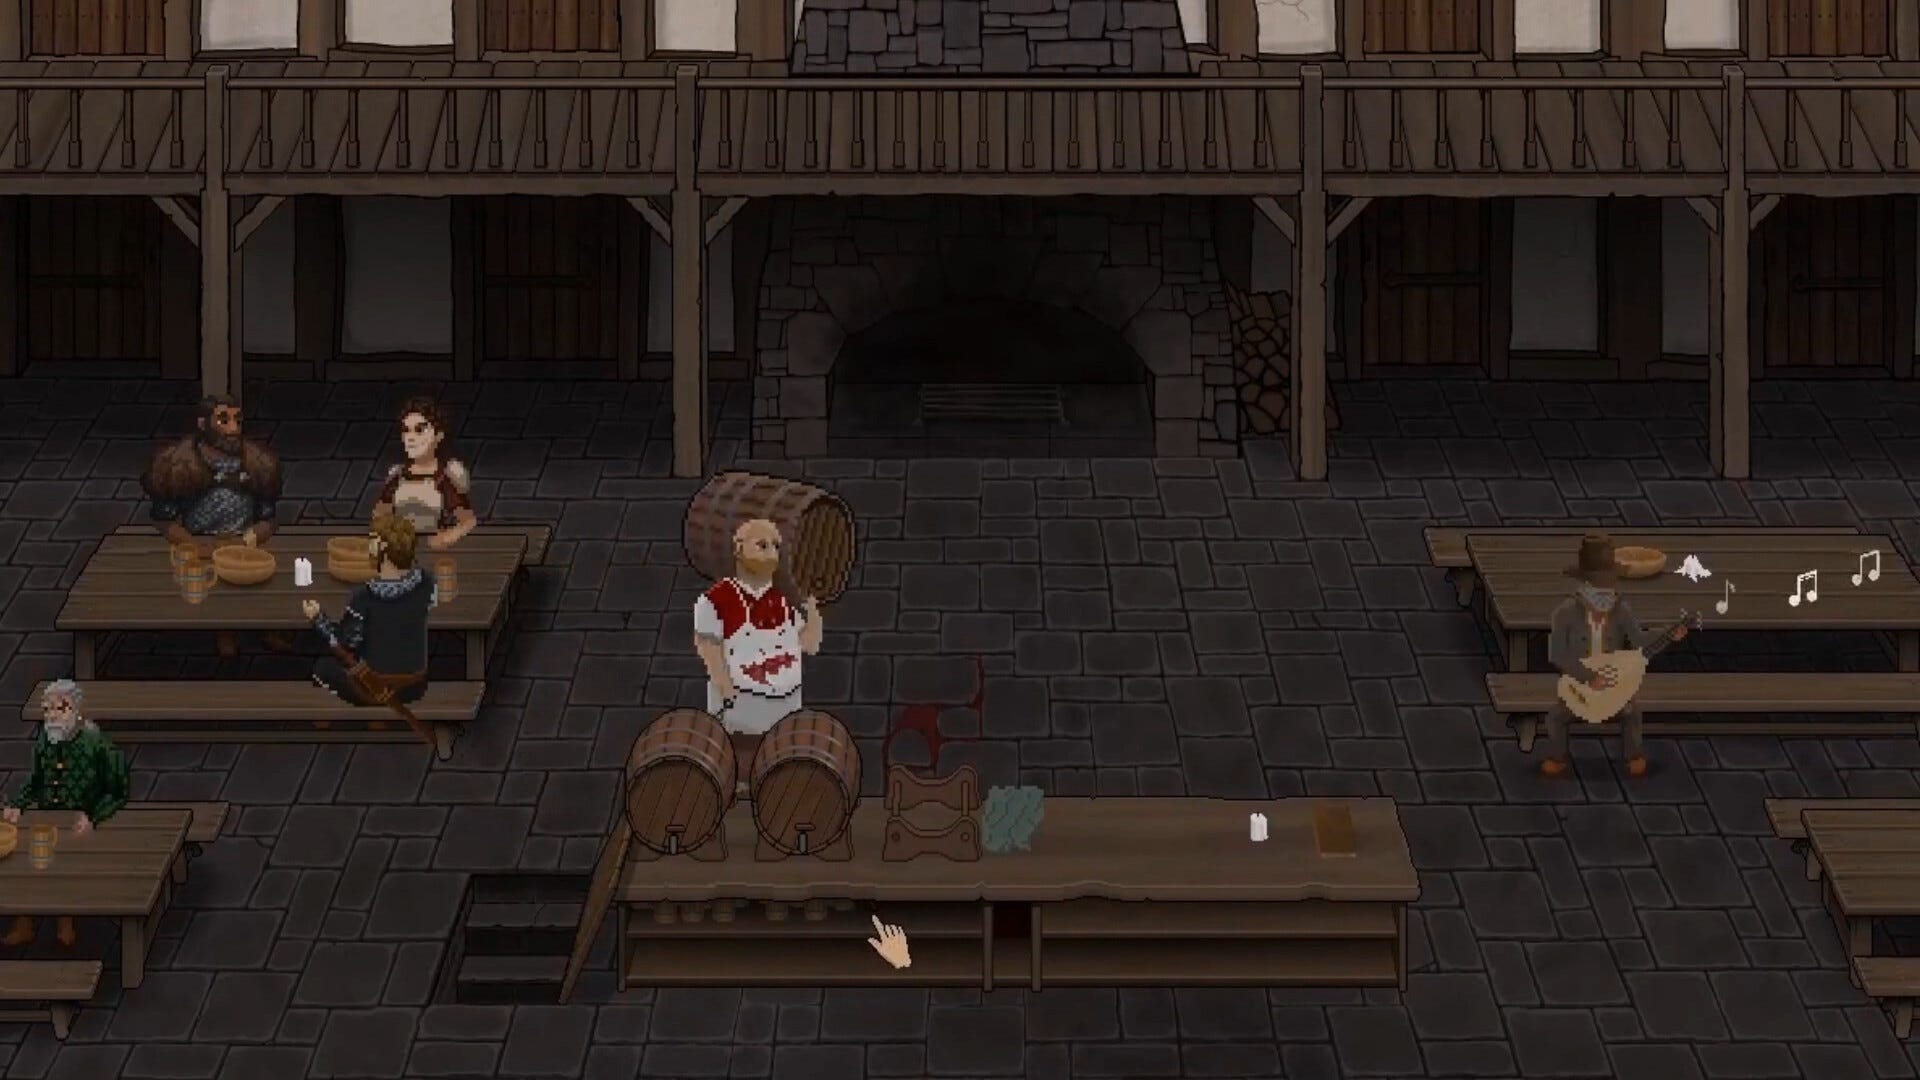 Innkeep satisfies my craving for a fantasy game that's just a grim drudgery simulator